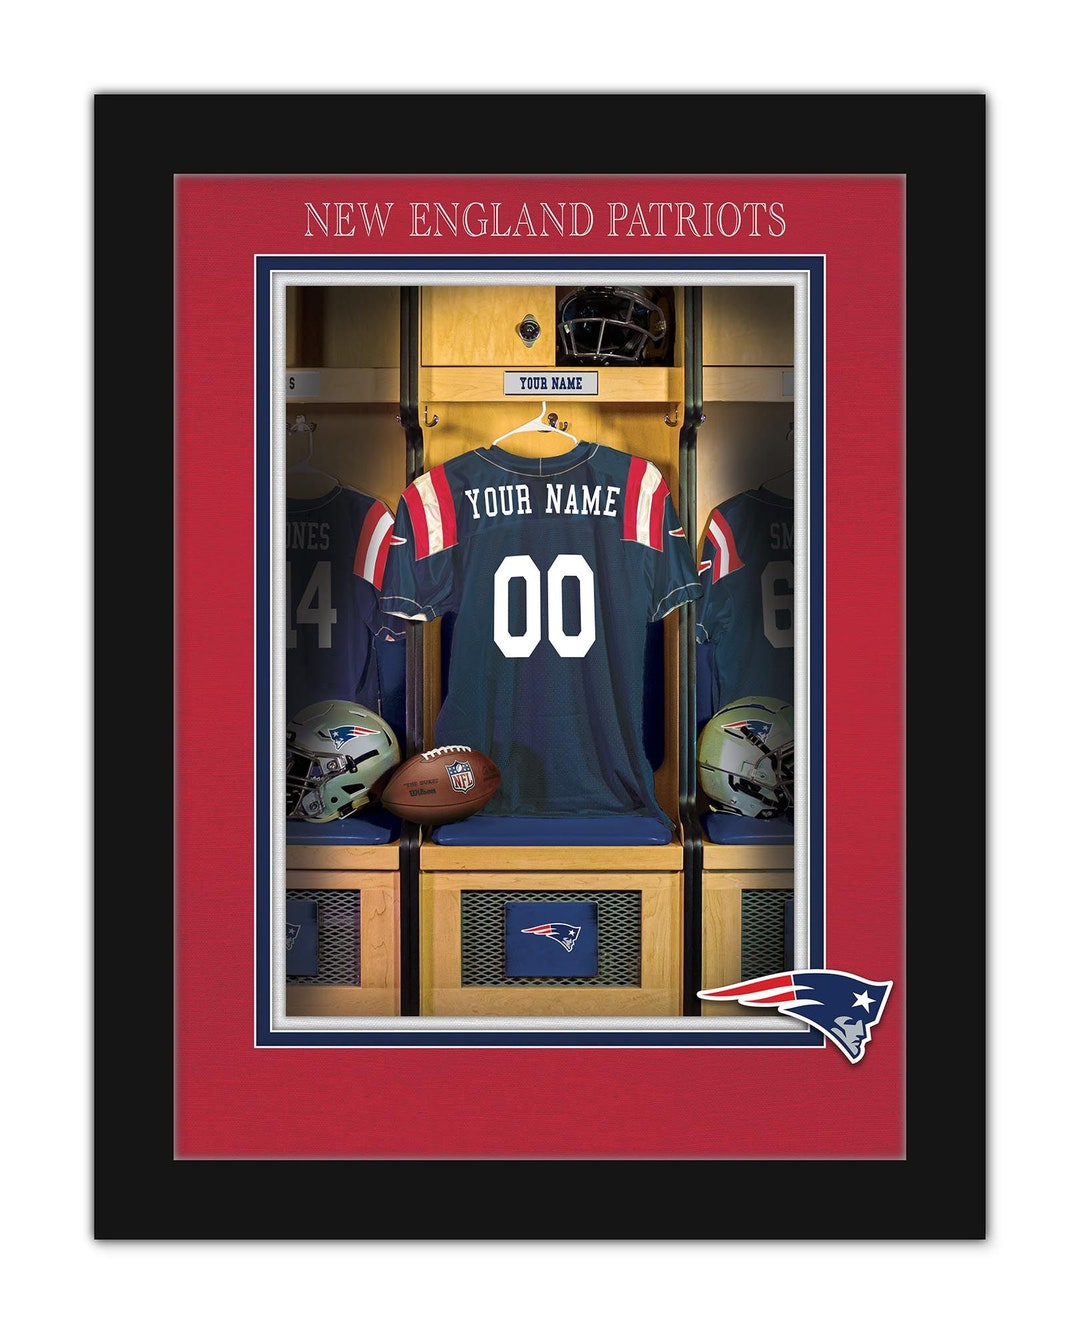 The all-time best New England Patriots by jersey number: 1-99 